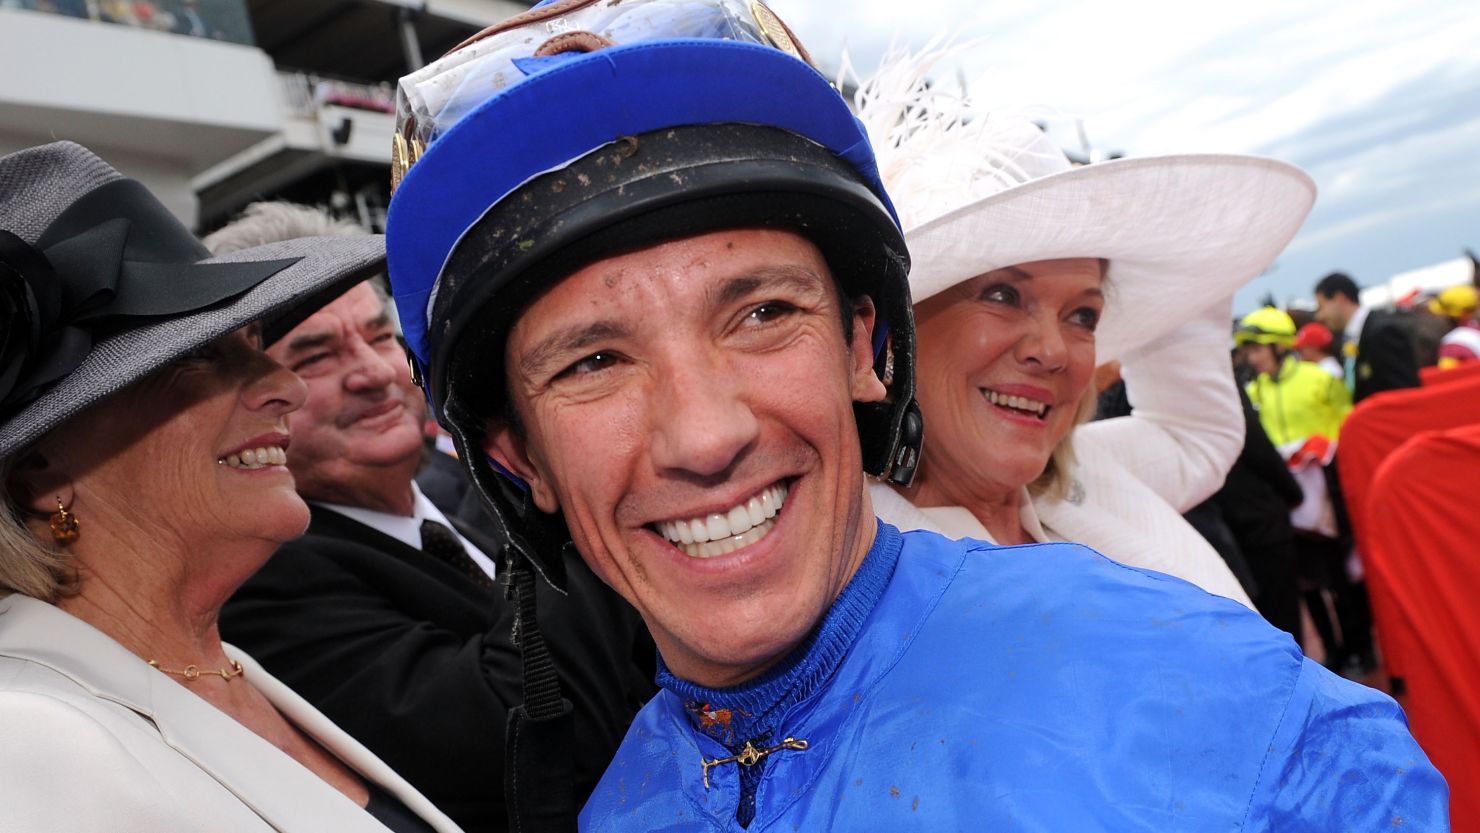 Frankie Dettori will be back in the saddle again after France Galop lifted his suspension for cocaine use.